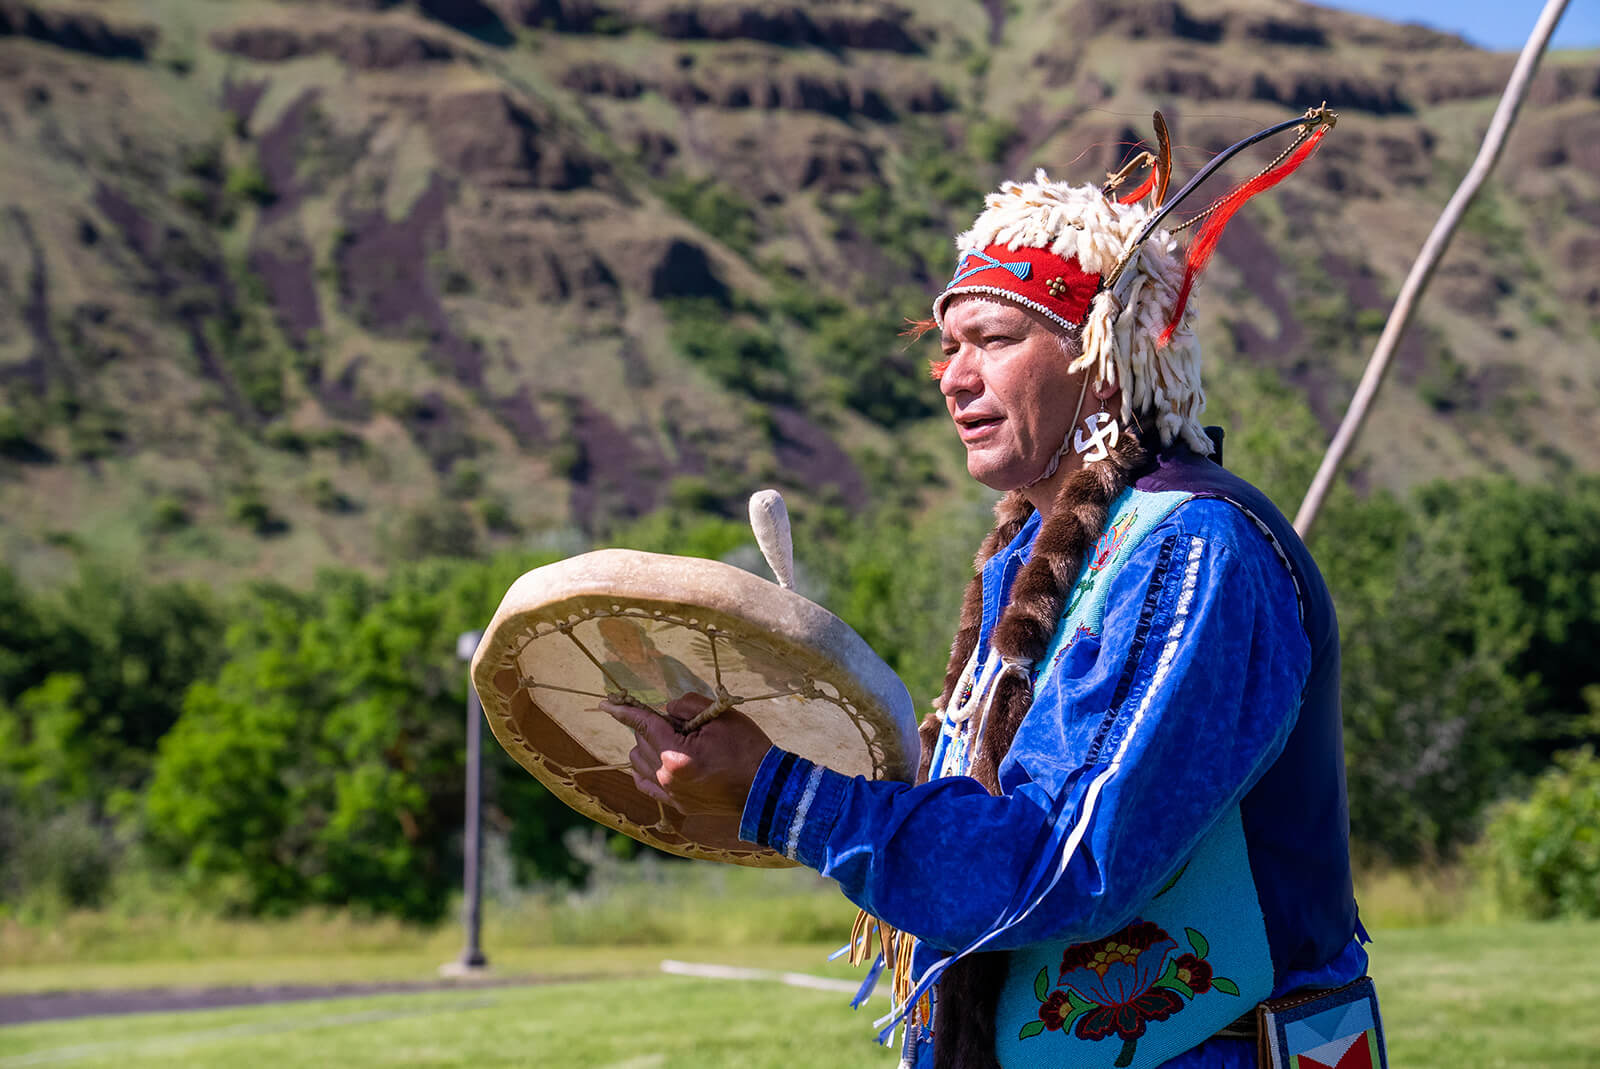 A man wearing traditional Nez Perce clothing playing a drum at Nez Perce National Historical Park.